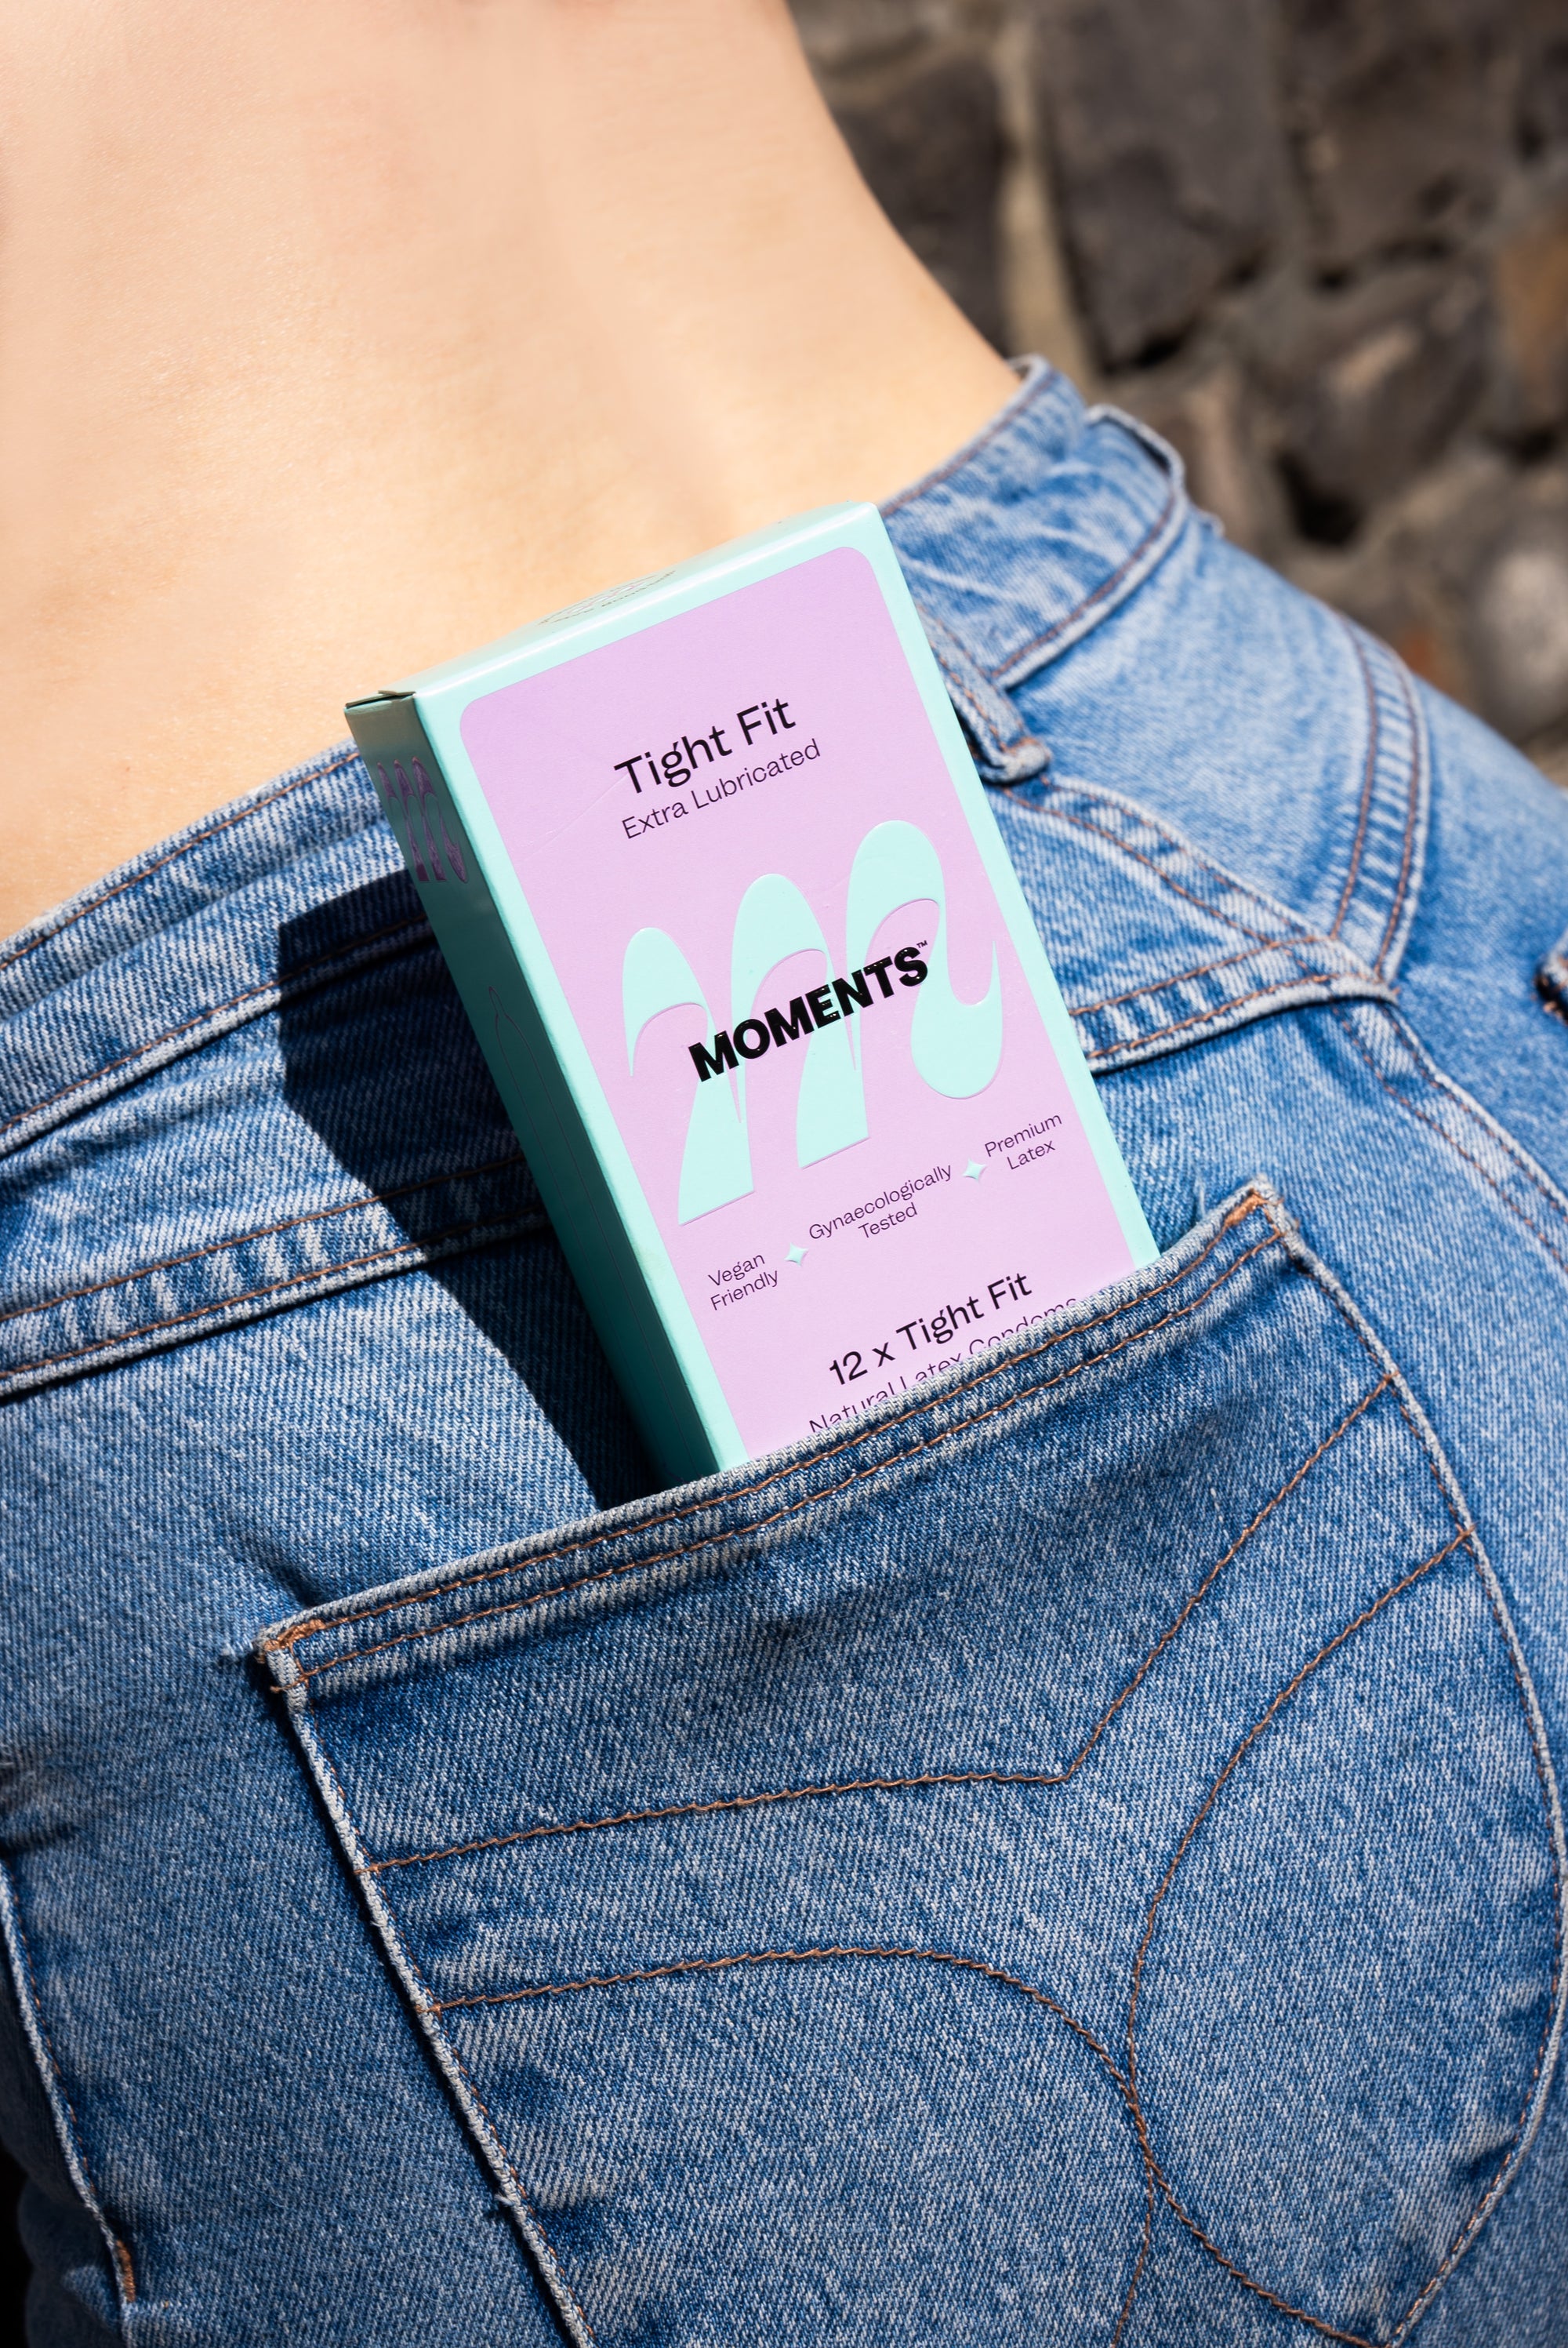 Box of Moments Tight Fit condoms in a woman's jeans back pocket